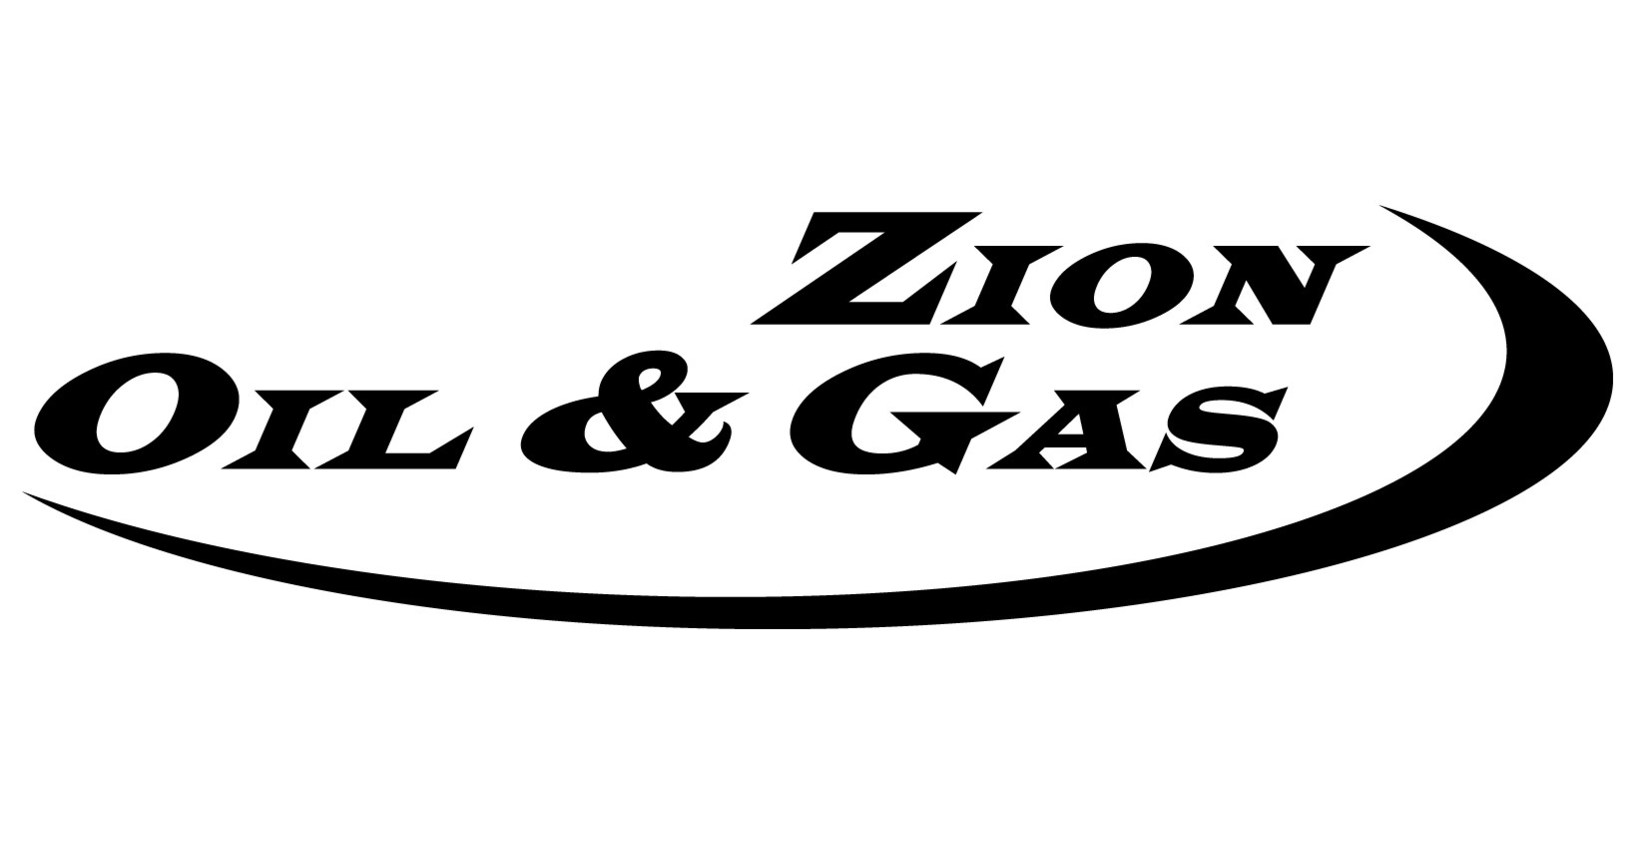 Zion oil and g as stock: BusinessHAB.com